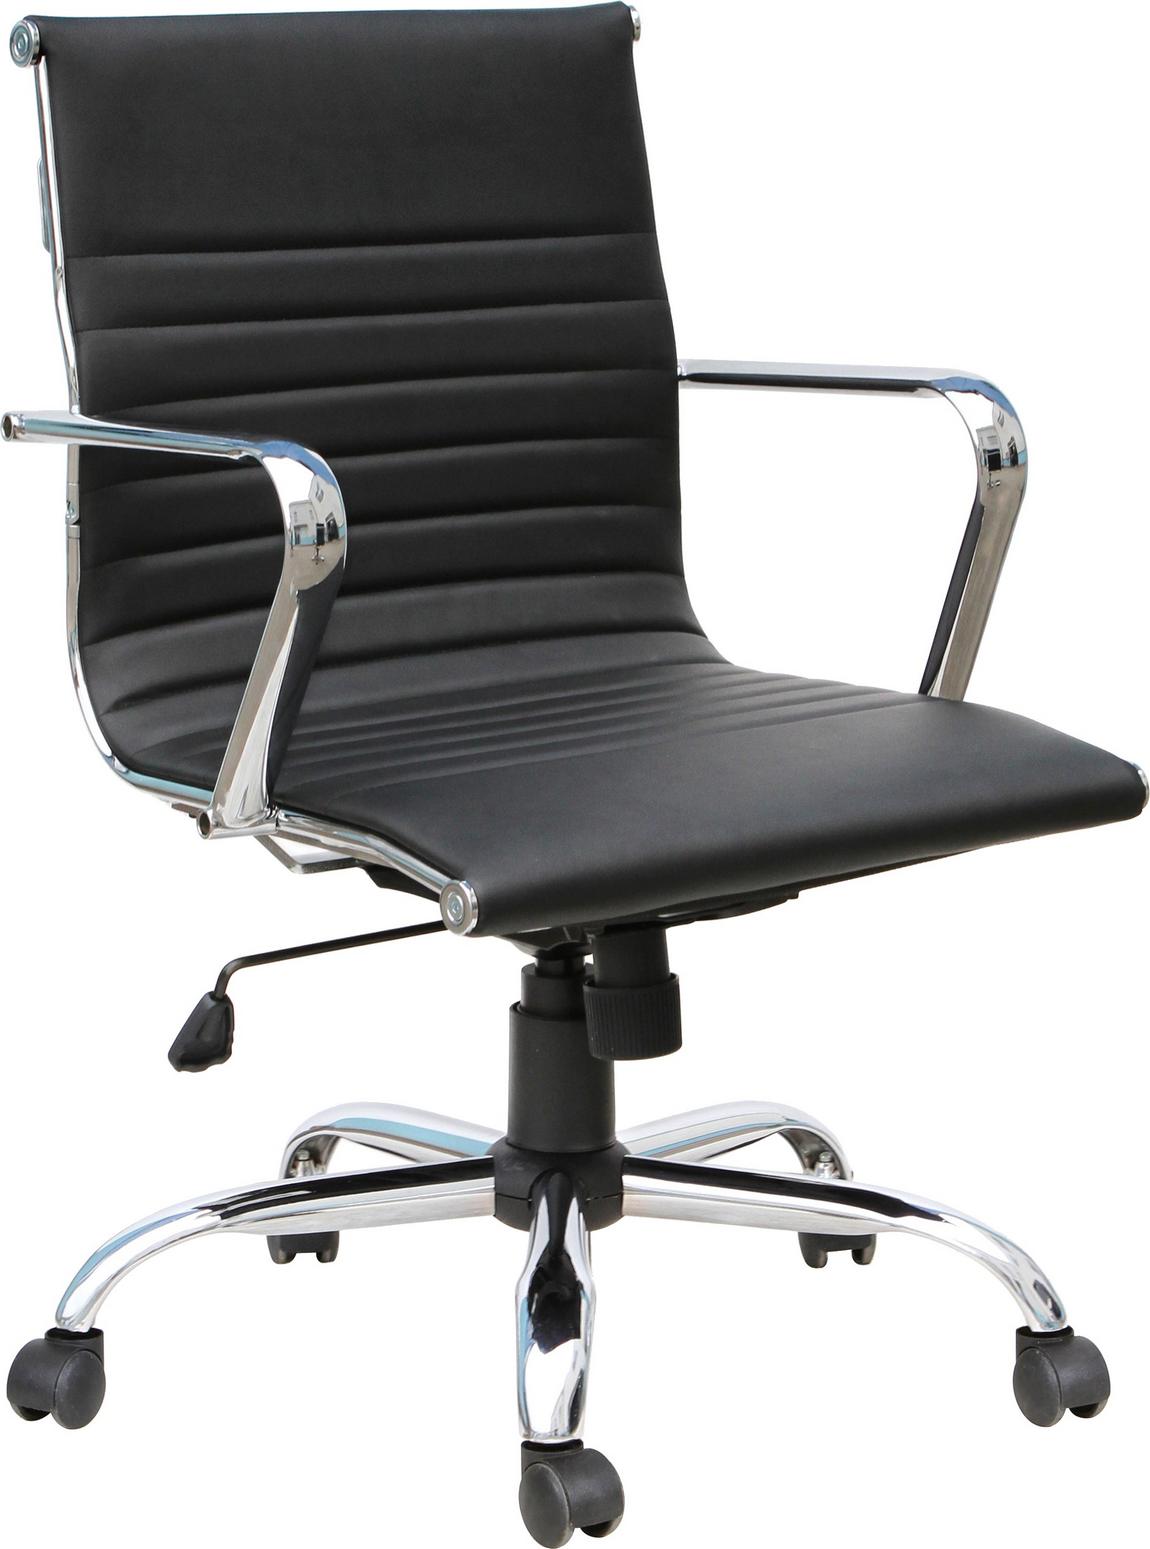 Black Modern Mid Back Vinyl Conference Room Chair with Metal Arms